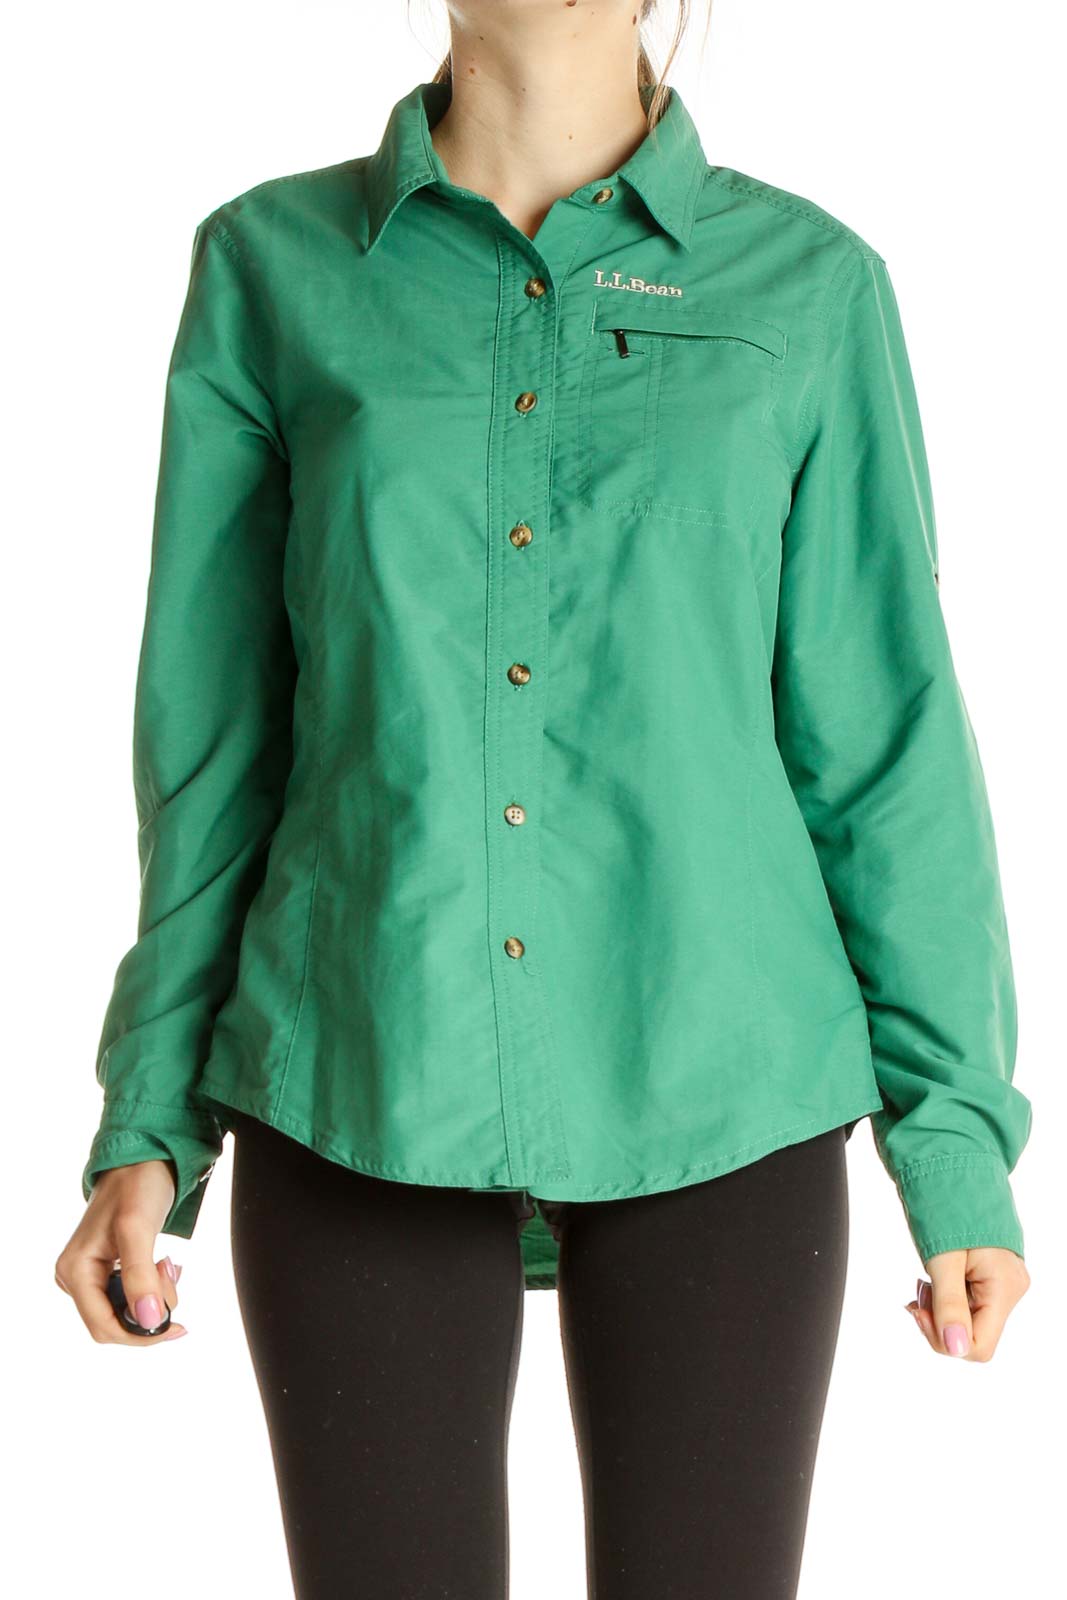 Green Solid Formal Shirt Front